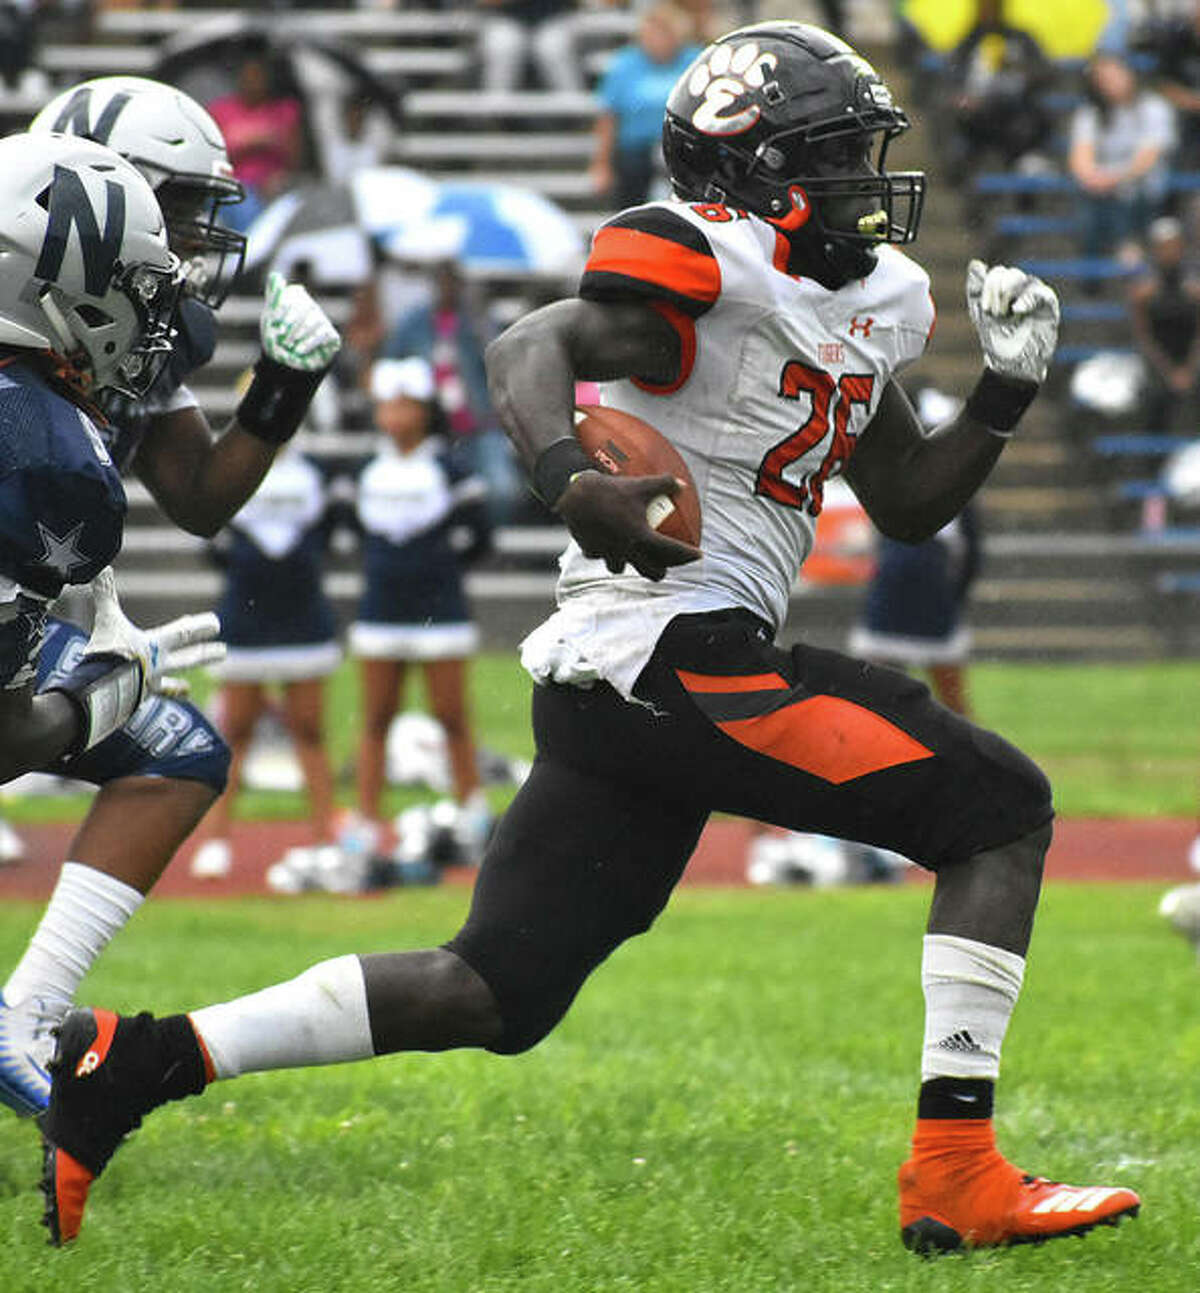 Edwardsville running back Justin Johnson Jr. breaks away from the McCluer North defense for a touchdown in the first quarter of last season’s opener.